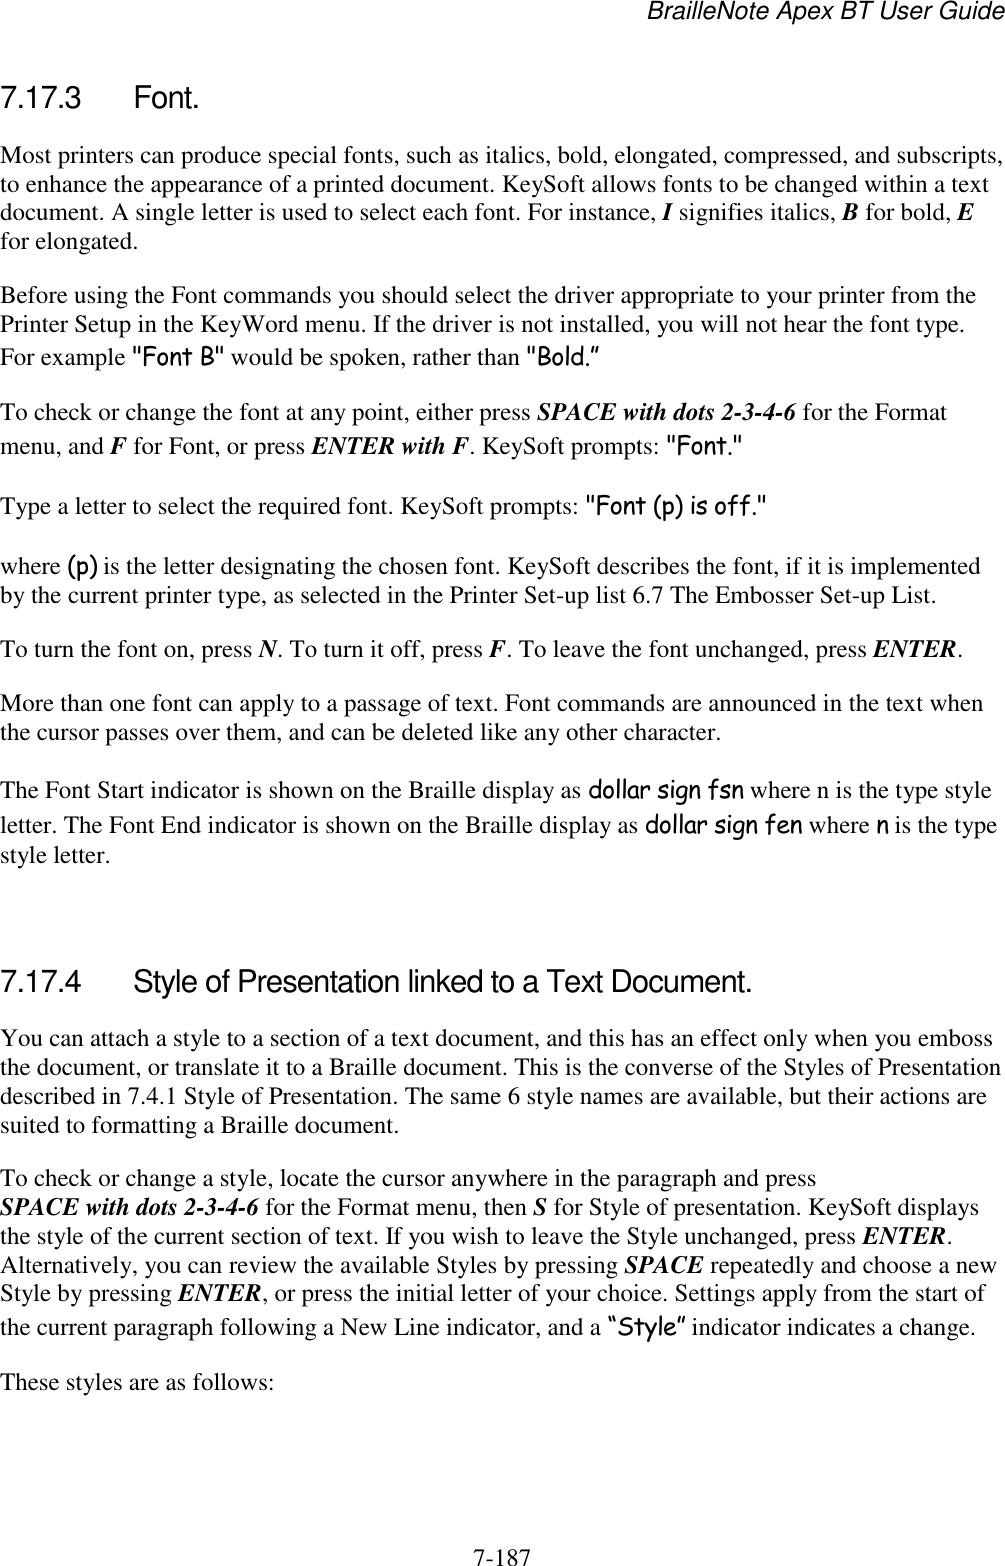 BrailleNote Apex BT User Guide   7-187   7.17.3  Font. Most printers can produce special fonts, such as italics, bold, elongated, compressed, and subscripts, to enhance the appearance of a printed document. KeySoft allows fonts to be changed within a text document. A single letter is used to select each font. For instance, I signifies italics, B for bold, E for elongated.  Before using the Font commands you should select the driver appropriate to your printer from the Printer Setup in the KeyWord menu. If the driver is not installed, you will not hear the font type. For example &quot;Font B&quot; would be spoken, rather than &quot;Bold.” To check or change the font at any point, either press SPACE with dots 2-3-4-6 for the Format menu, and F for Font, or press ENTER with F. KeySoft prompts: &quot;Font.&quot; Type a letter to select the required font. KeySoft prompts: &quot;Font (p) is off.&quot; where (p) is the letter designating the chosen font. KeySoft describes the font, if it is implemented by the current printer type, as selected in the Printer Set-up list 6.7 The Embosser Set-up List. To turn the font on, press N. To turn it off, press F. To leave the font unchanged, press ENTER. More than one font can apply to a passage of text. Font commands are announced in the text when the cursor passes over them, and can be deleted like any other character. The Font Start indicator is shown on the Braille display as dollar sign fsn where n is the type style letter. The Font End indicator is shown on the Braille display as dollar sign fen where n is the type style letter.   7.17.4  Style of Presentation linked to a Text Document. You can attach a style to a section of a text document, and this has an effect only when you emboss the document, or translate it to a Braille document. This is the converse of the Styles of Presentation described in 7.4.1 Style of Presentation. The same 6 style names are available, but their actions are suited to formatting a Braille document. To check or change a style, locate the cursor anywhere in the paragraph and press SPACE with dots 2-3-4-6 for the Format menu, then S for Style of presentation. KeySoft displays the style of the current section of text. If you wish to leave the Style unchanged, press ENTER. Alternatively, you can review the available Styles by pressing SPACE repeatedly and choose a new Style by pressing ENTER, or press the initial letter of your choice. Settings apply from the start of the current paragraph following a New Line indicator, and a “Style” indicator indicates a change. These styles are as follows:   